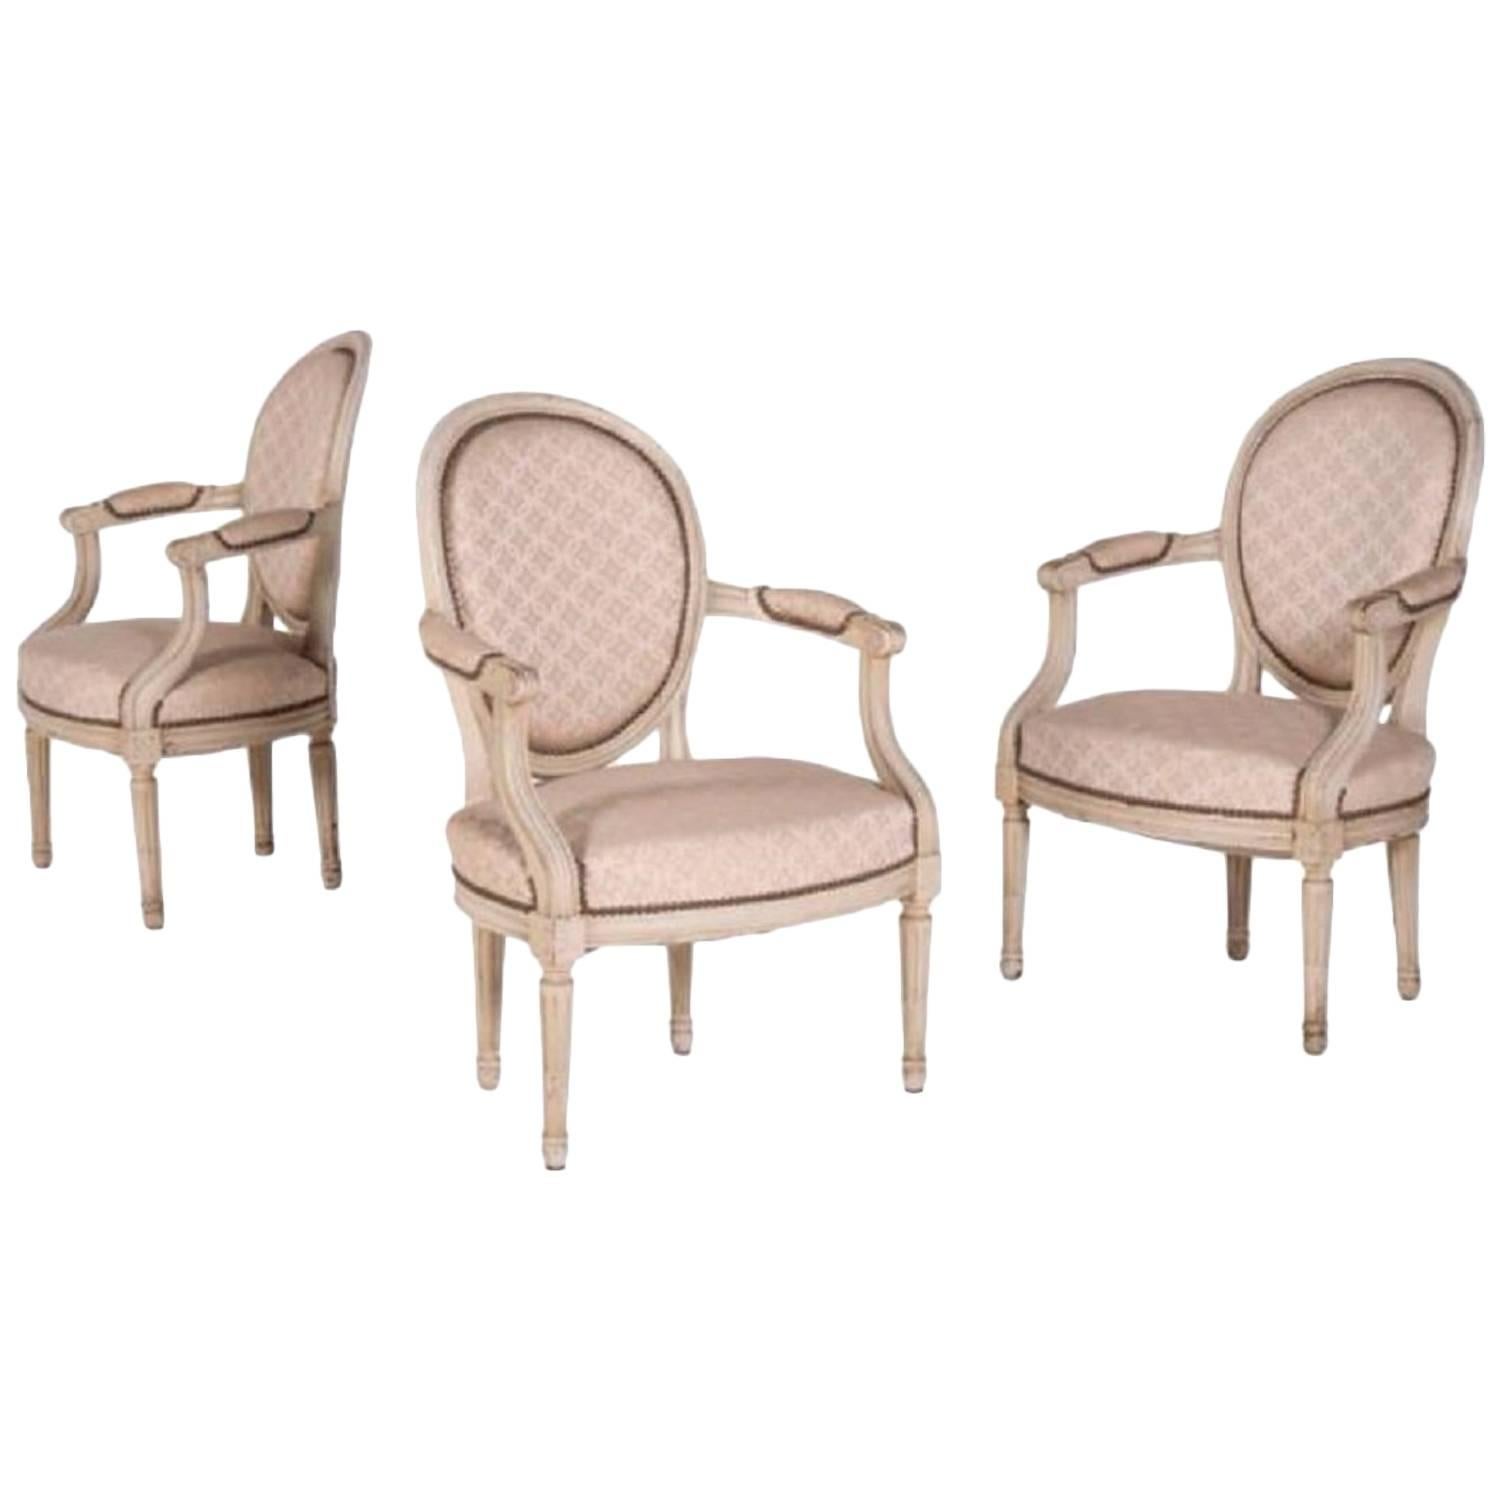 Three Elegant Antique "Cabriolet" Armchairs in Louis XVI Style, France, 1860 For Sale